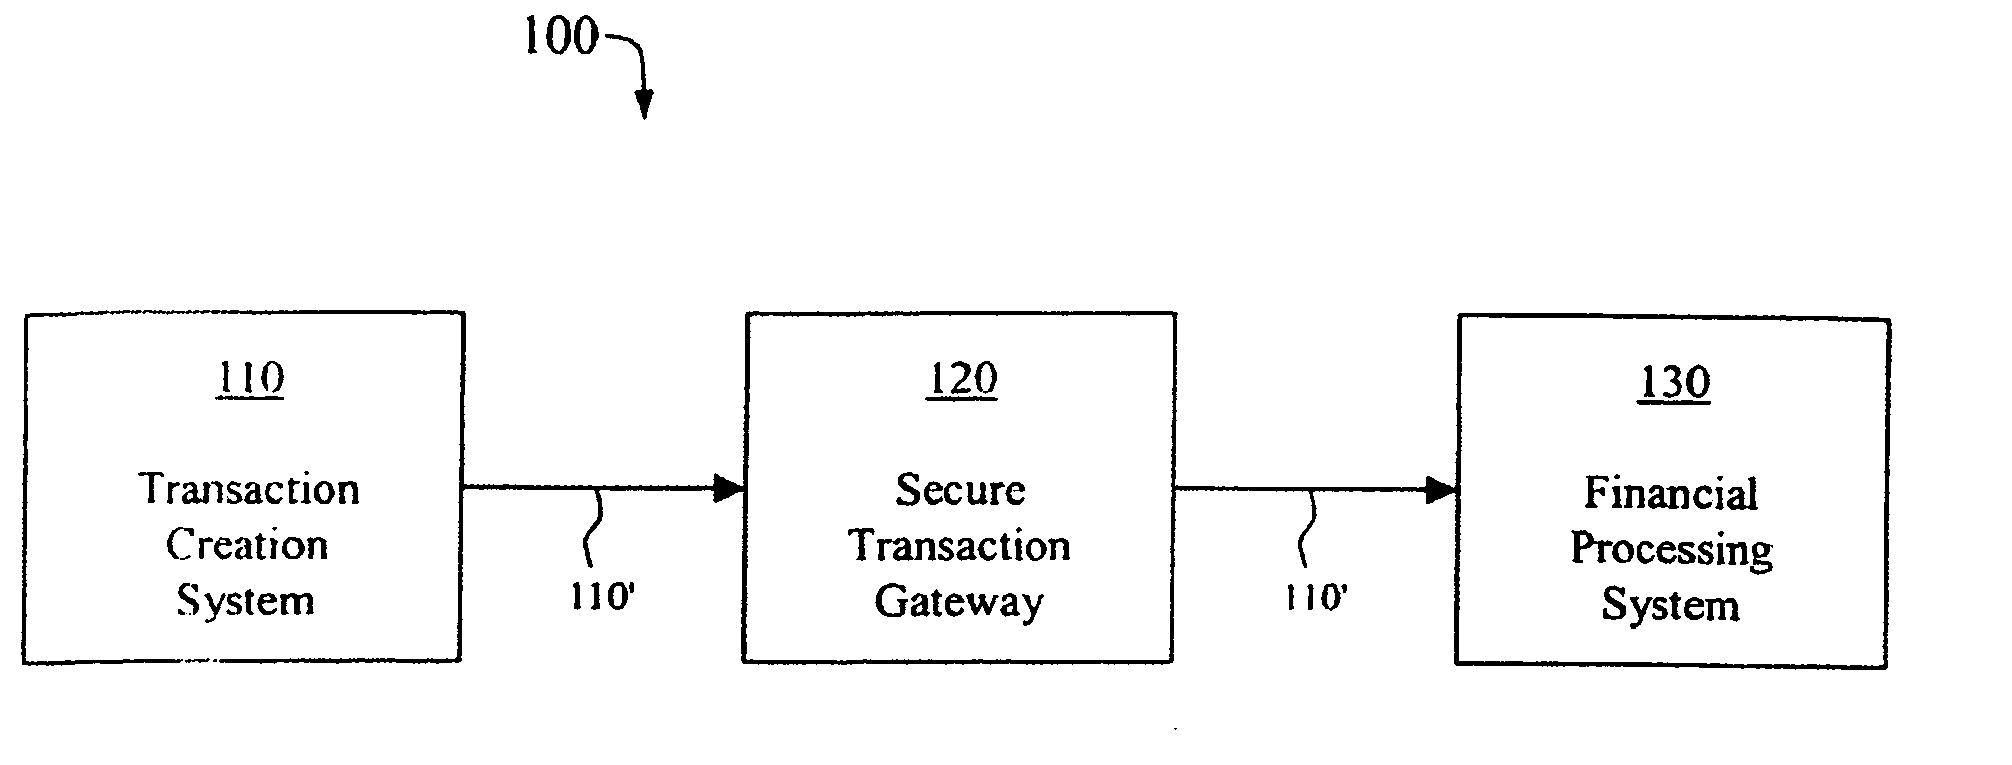 Secure financial transaction gateway and vault